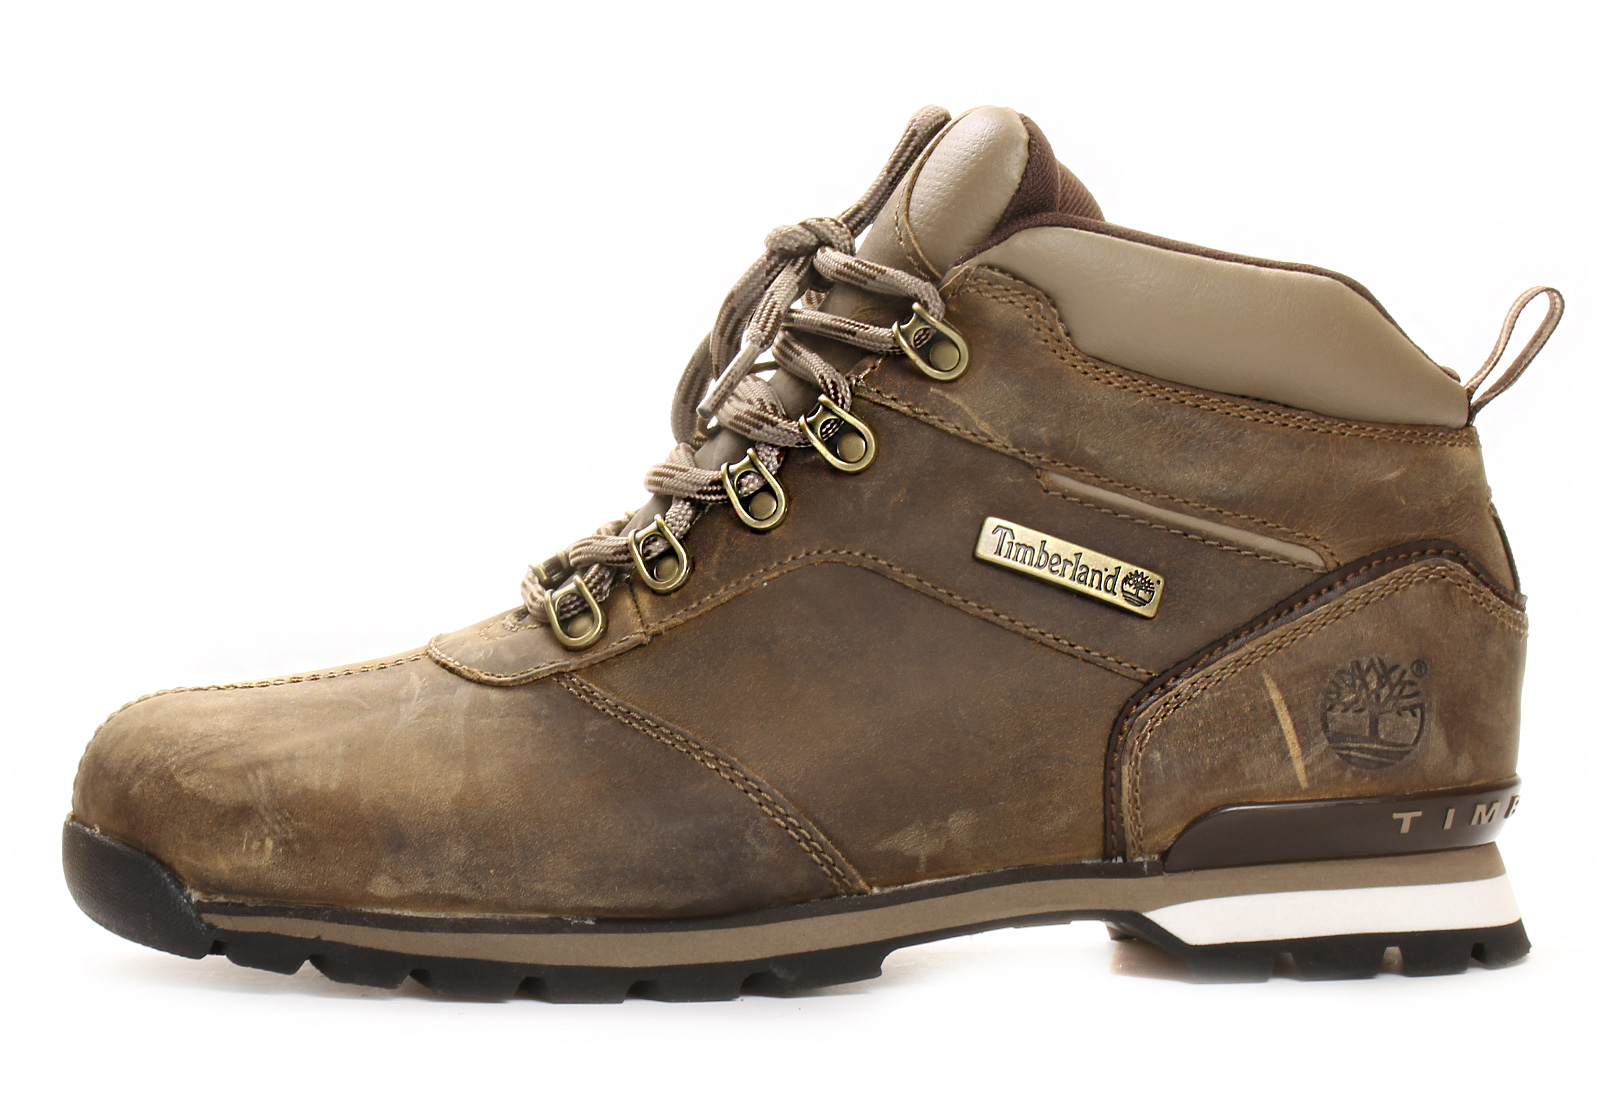 Timberland Boots - Splitrock 2 Hiker - 6821R-GRY - Online shop for ...